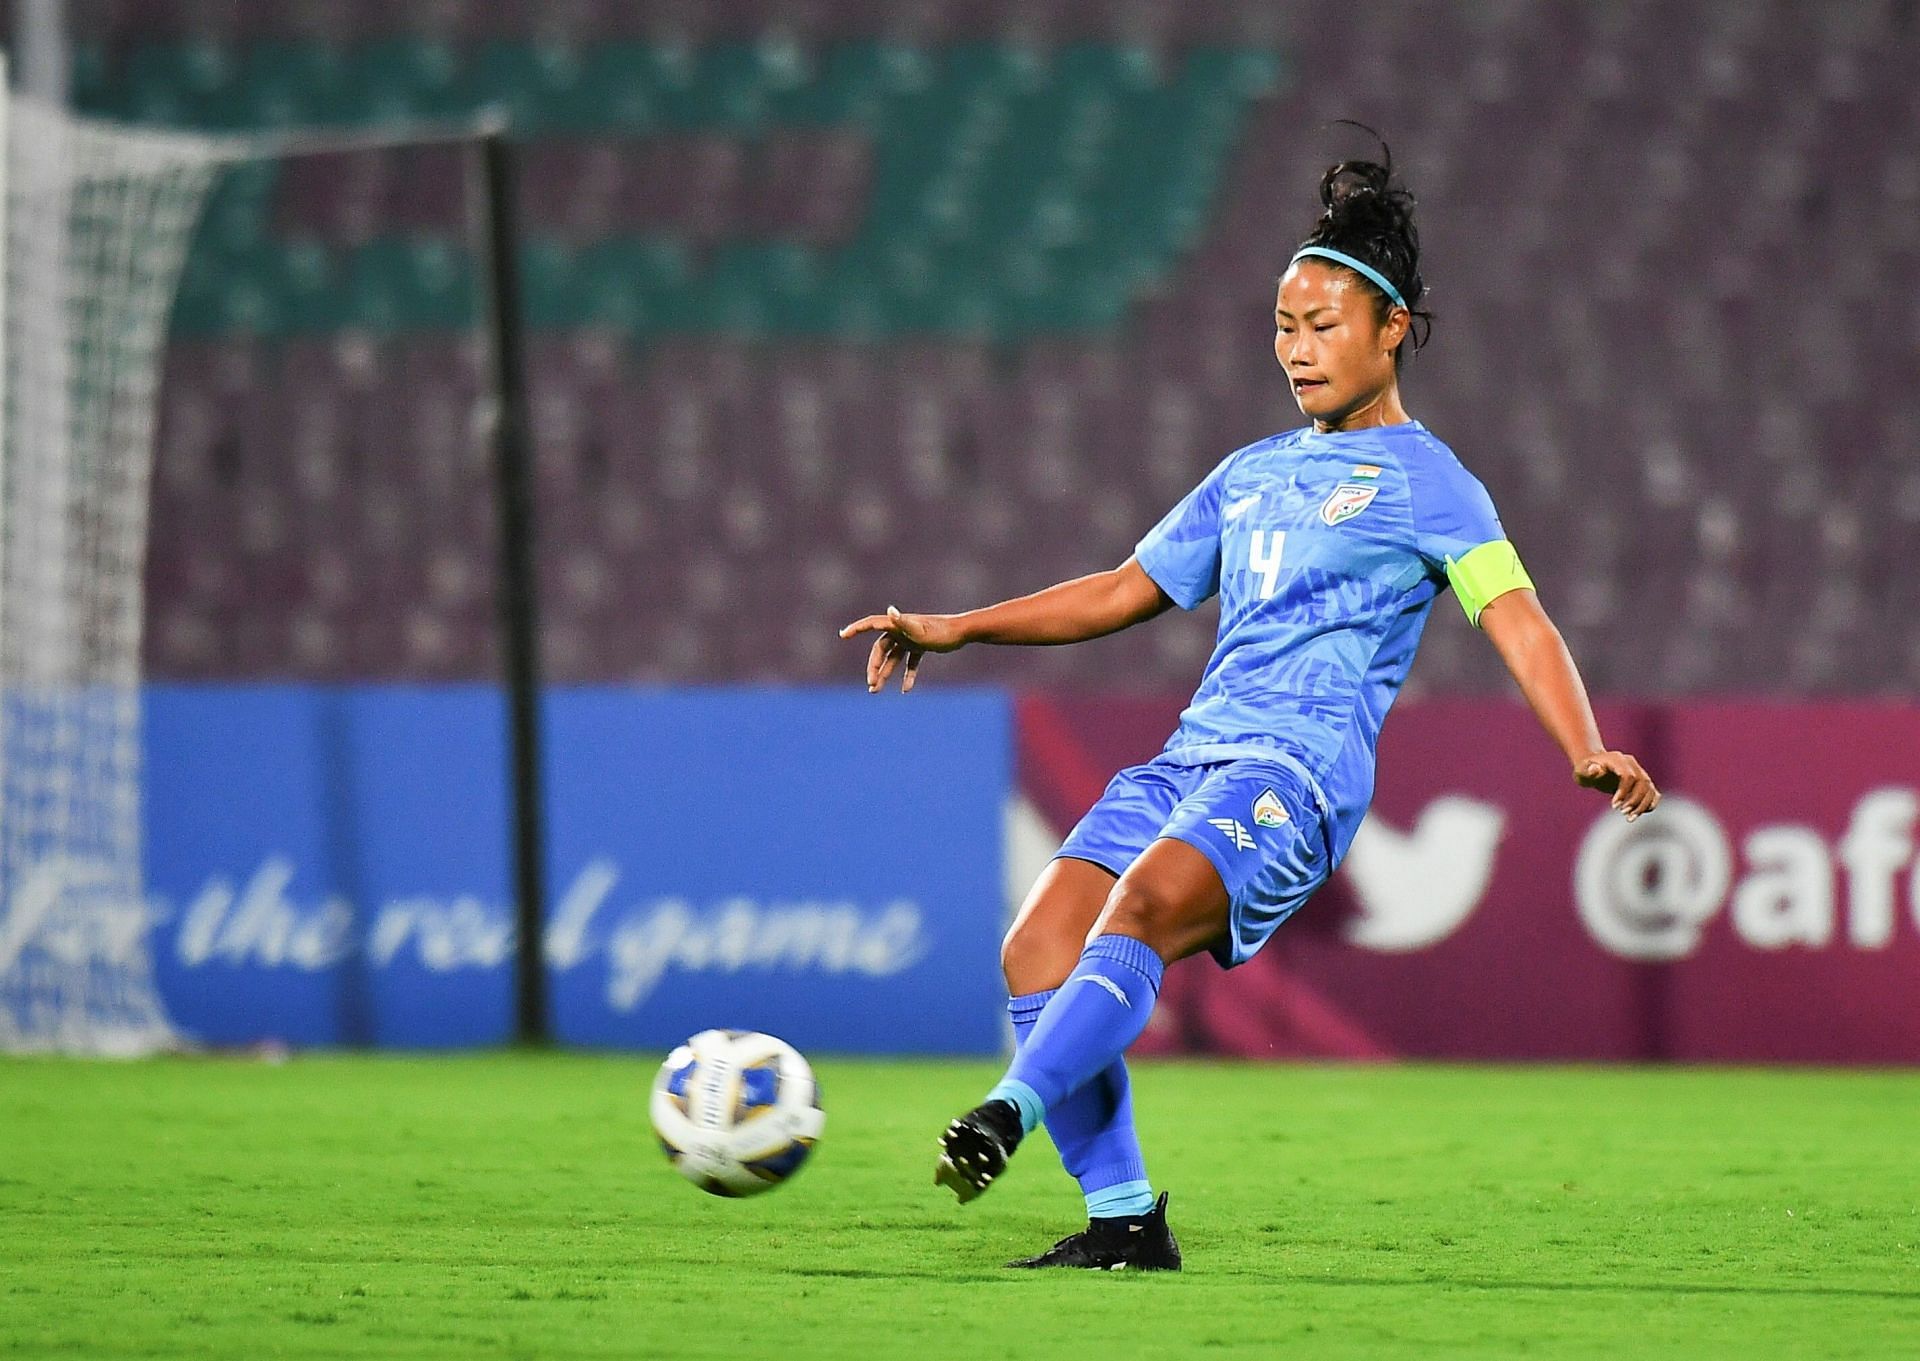 Captain Ashalata Devi will need to put up a more inspired performance in the upcoming game (Image courtesy: AIFF Media)